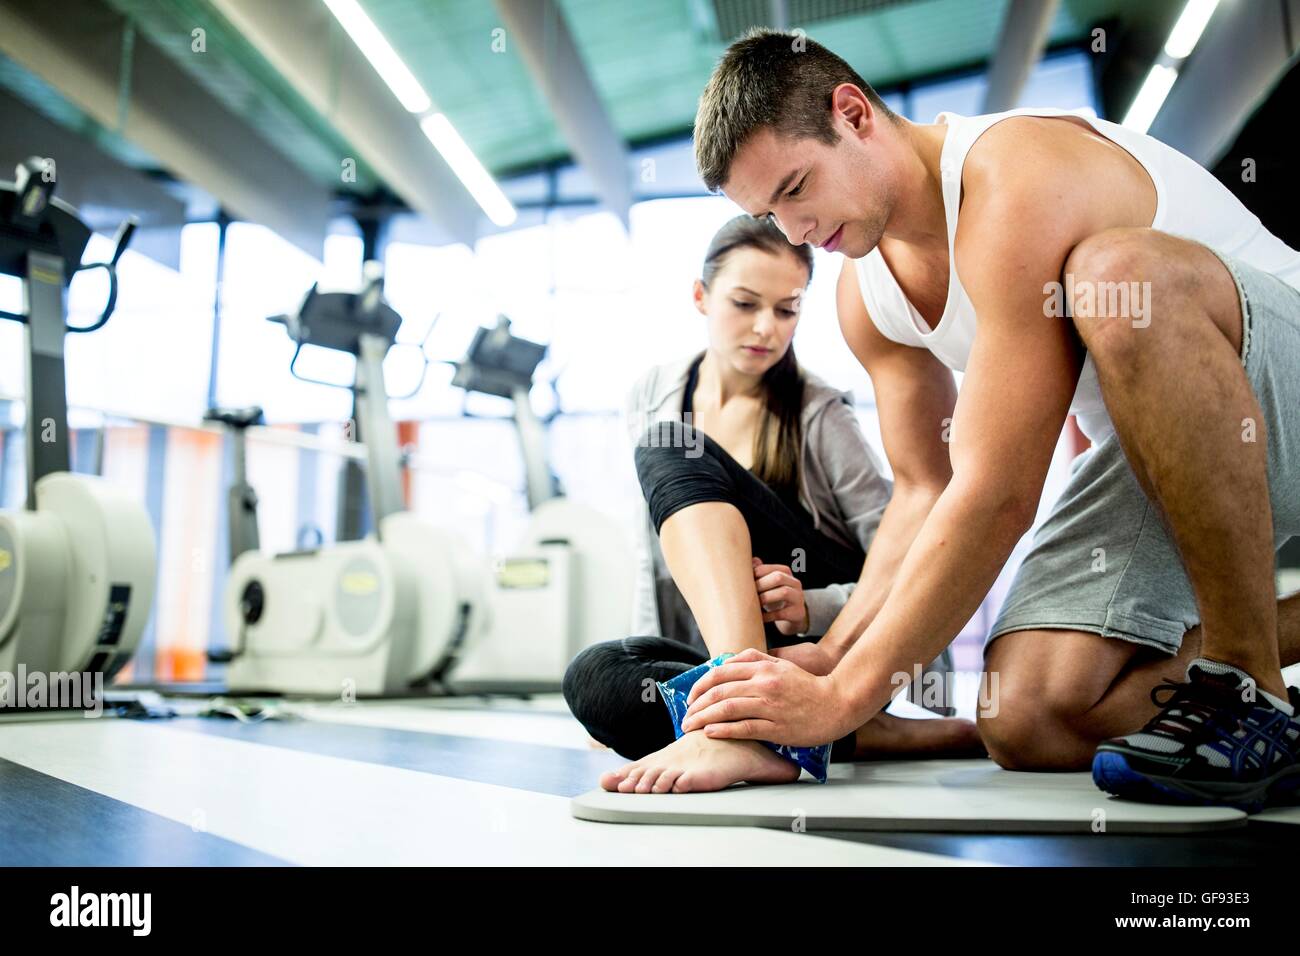 PROPERTY RELEASED. MODEL RELEASED. Young man applying ice pack on young woman's ankle in gym. Stock Photo